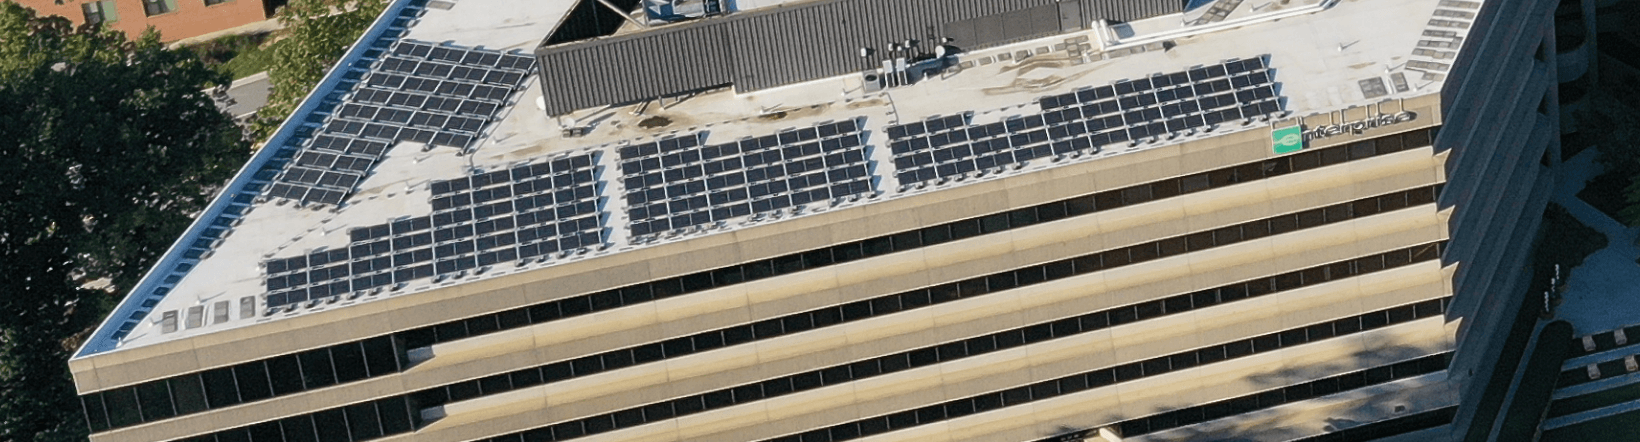 solar panels cover the rooftop of the Palisades office park